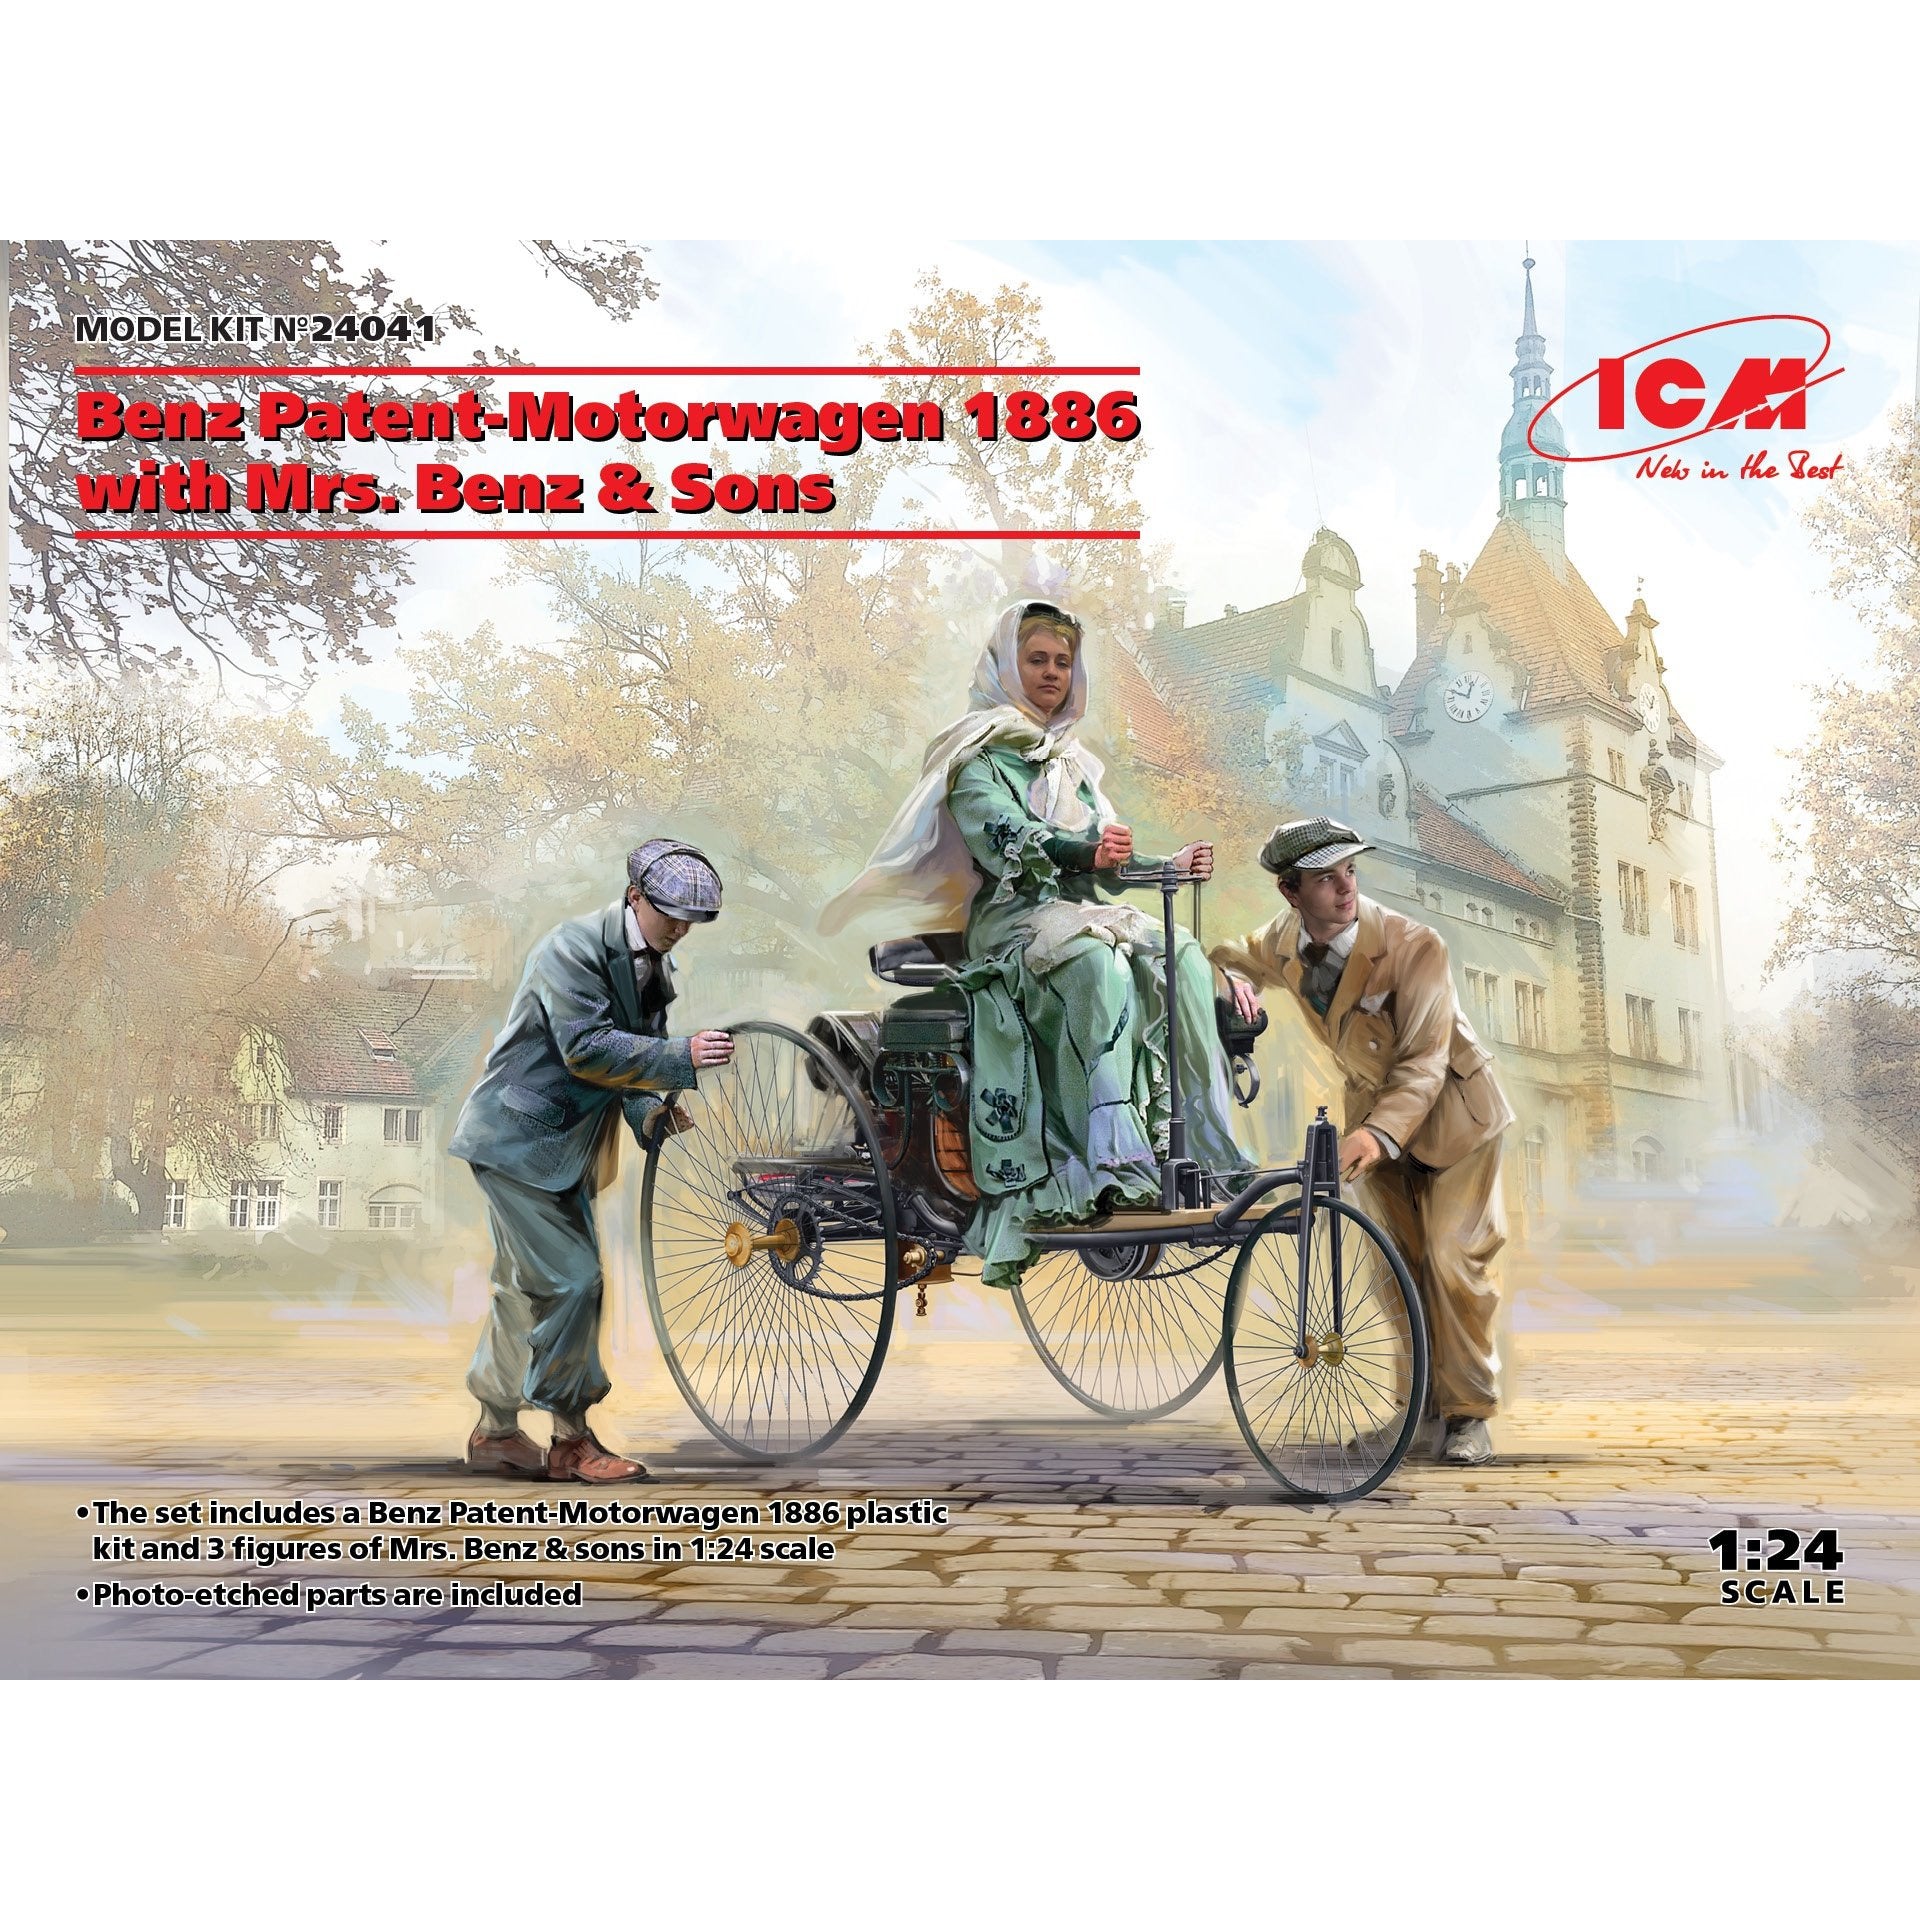 Benz Patent-Motorwagen 1886 with Mrs. Benz and Sons 1/24 Model Car Kit #24041 by ICM